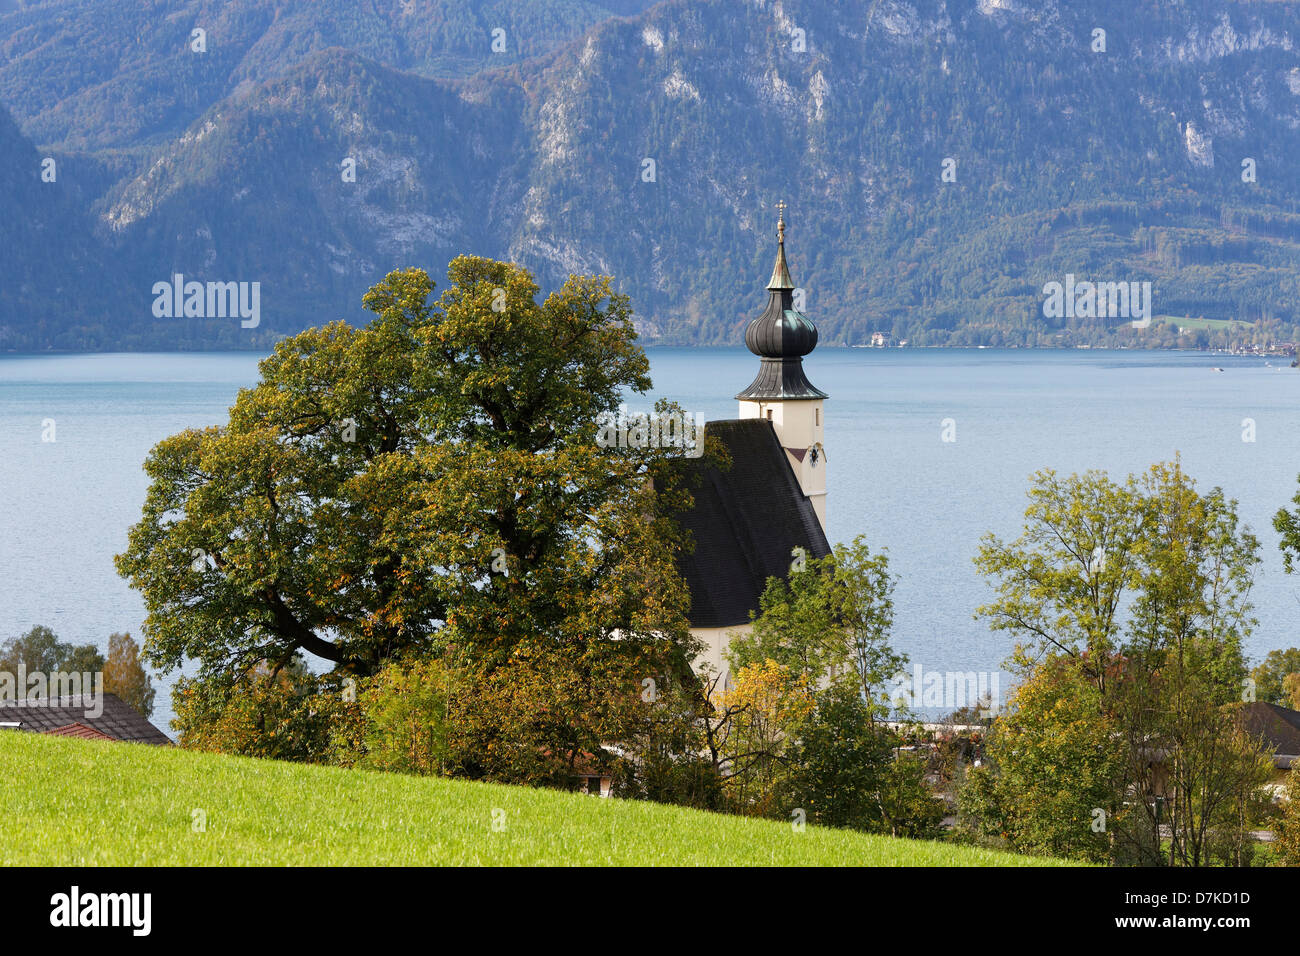 Austria, Upper Austria, View of St Andreas church at Steinbach am Attersee Stock Photo